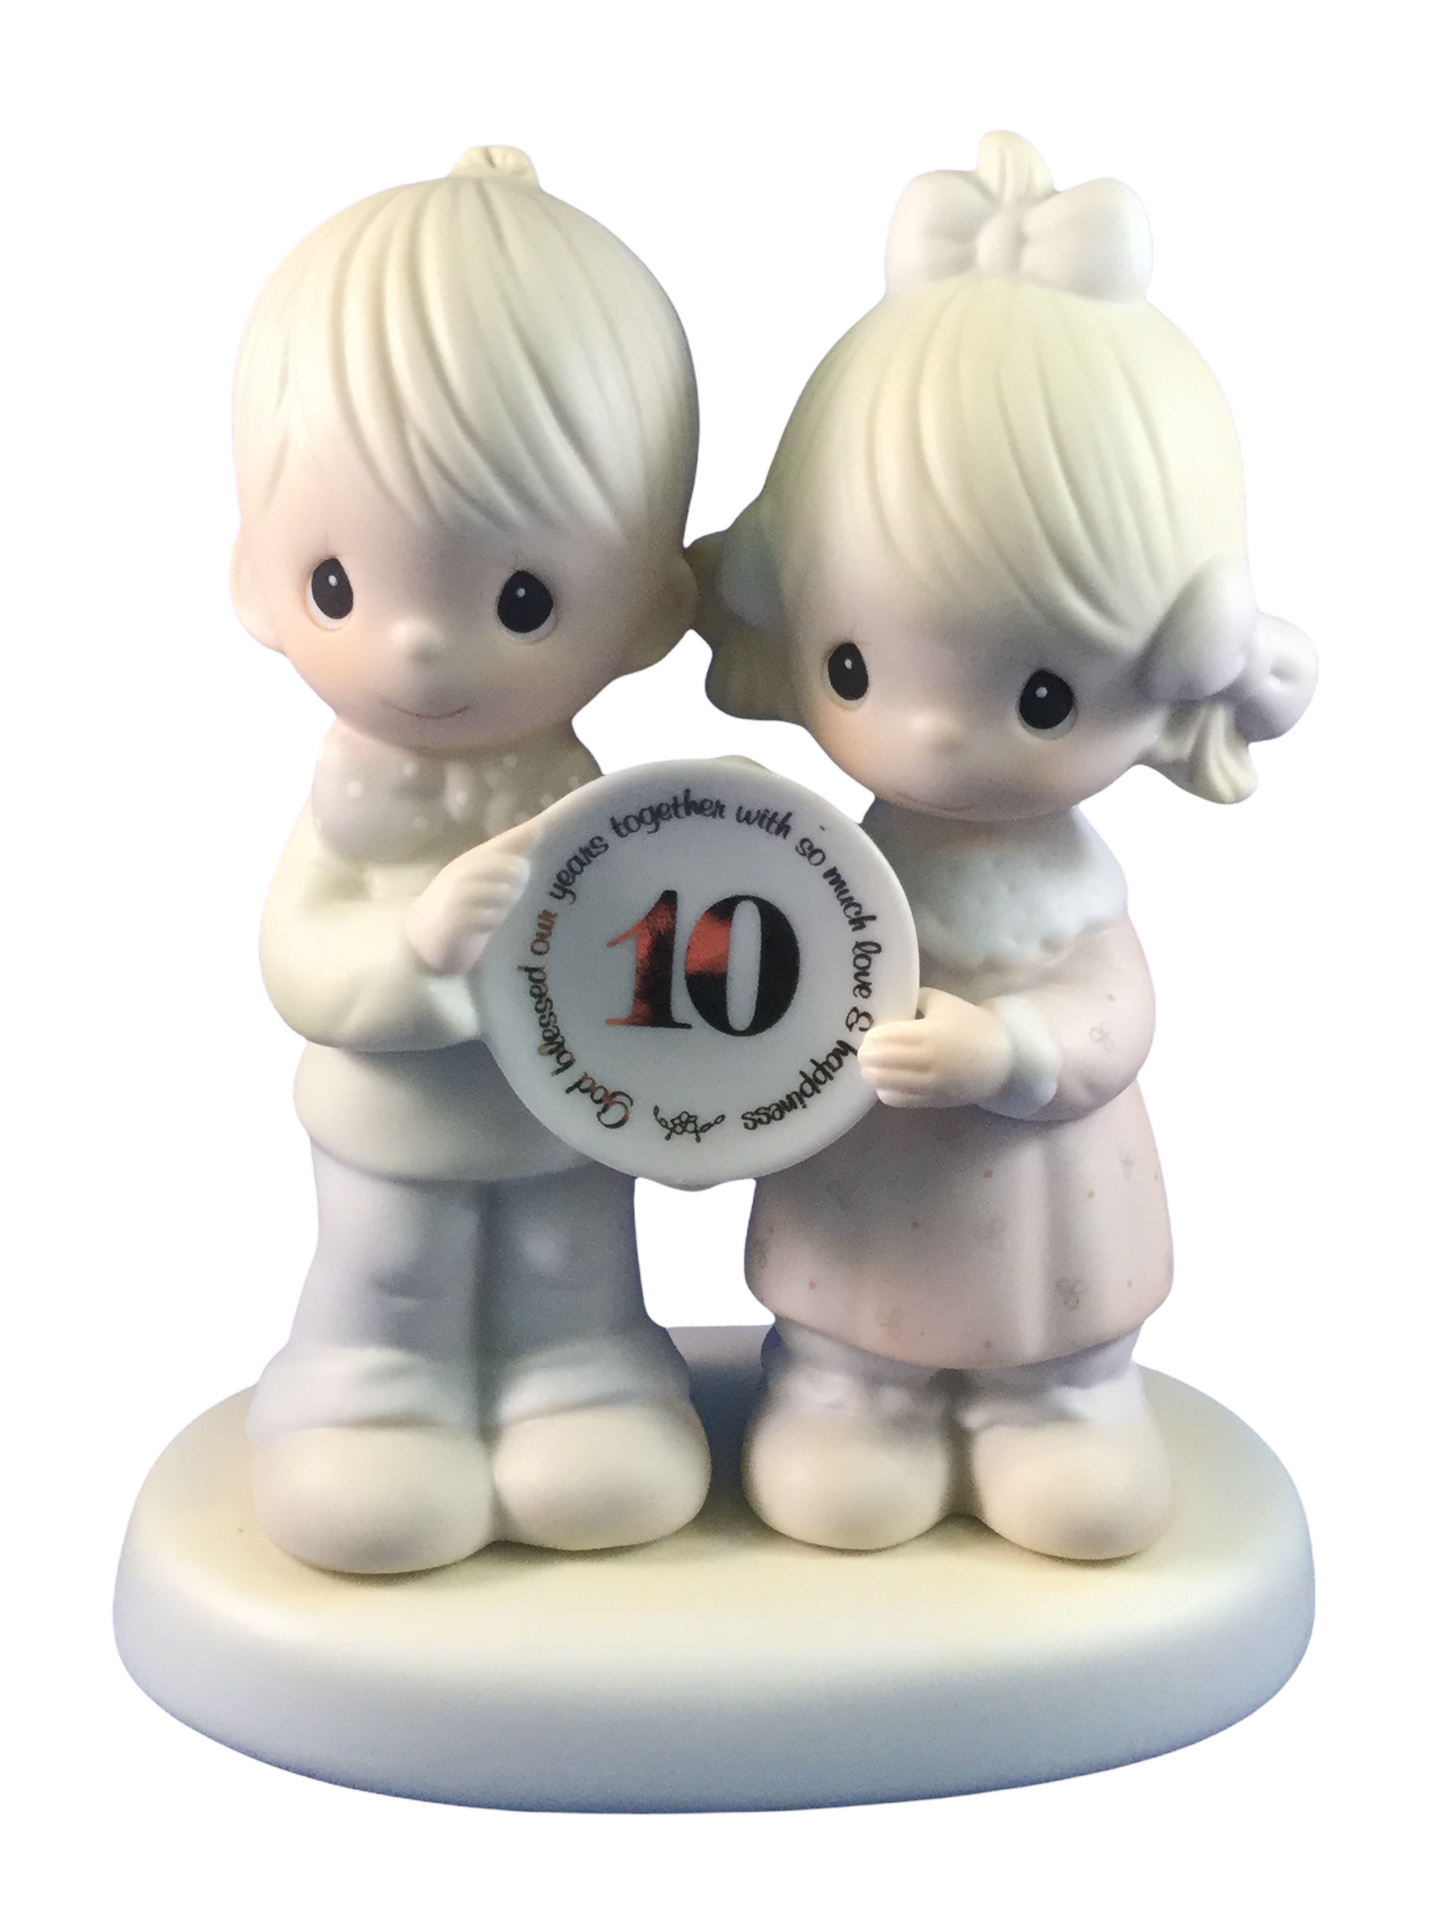 God Blessed Our Years Together With So Much Love And Happiness (10th) - Precious Moment Figurine